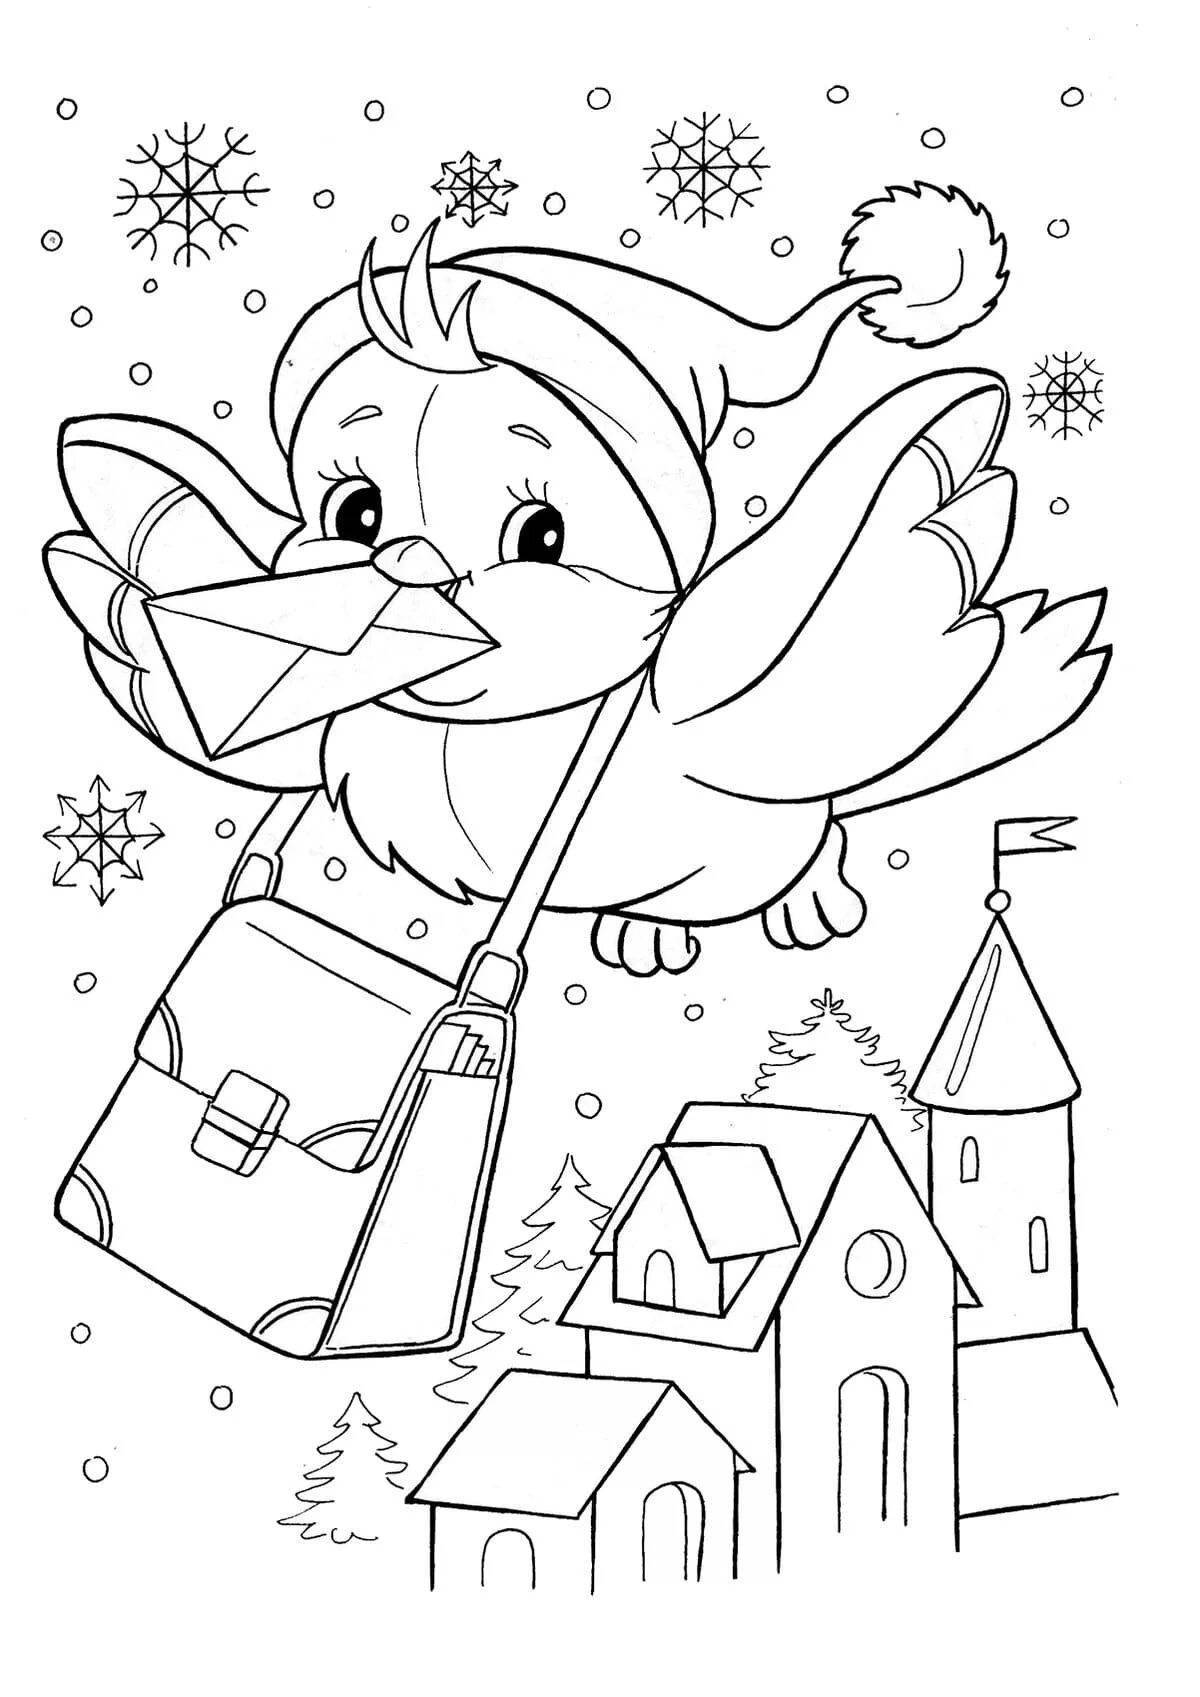 Serene winter coloring book for kids 6-7 years old